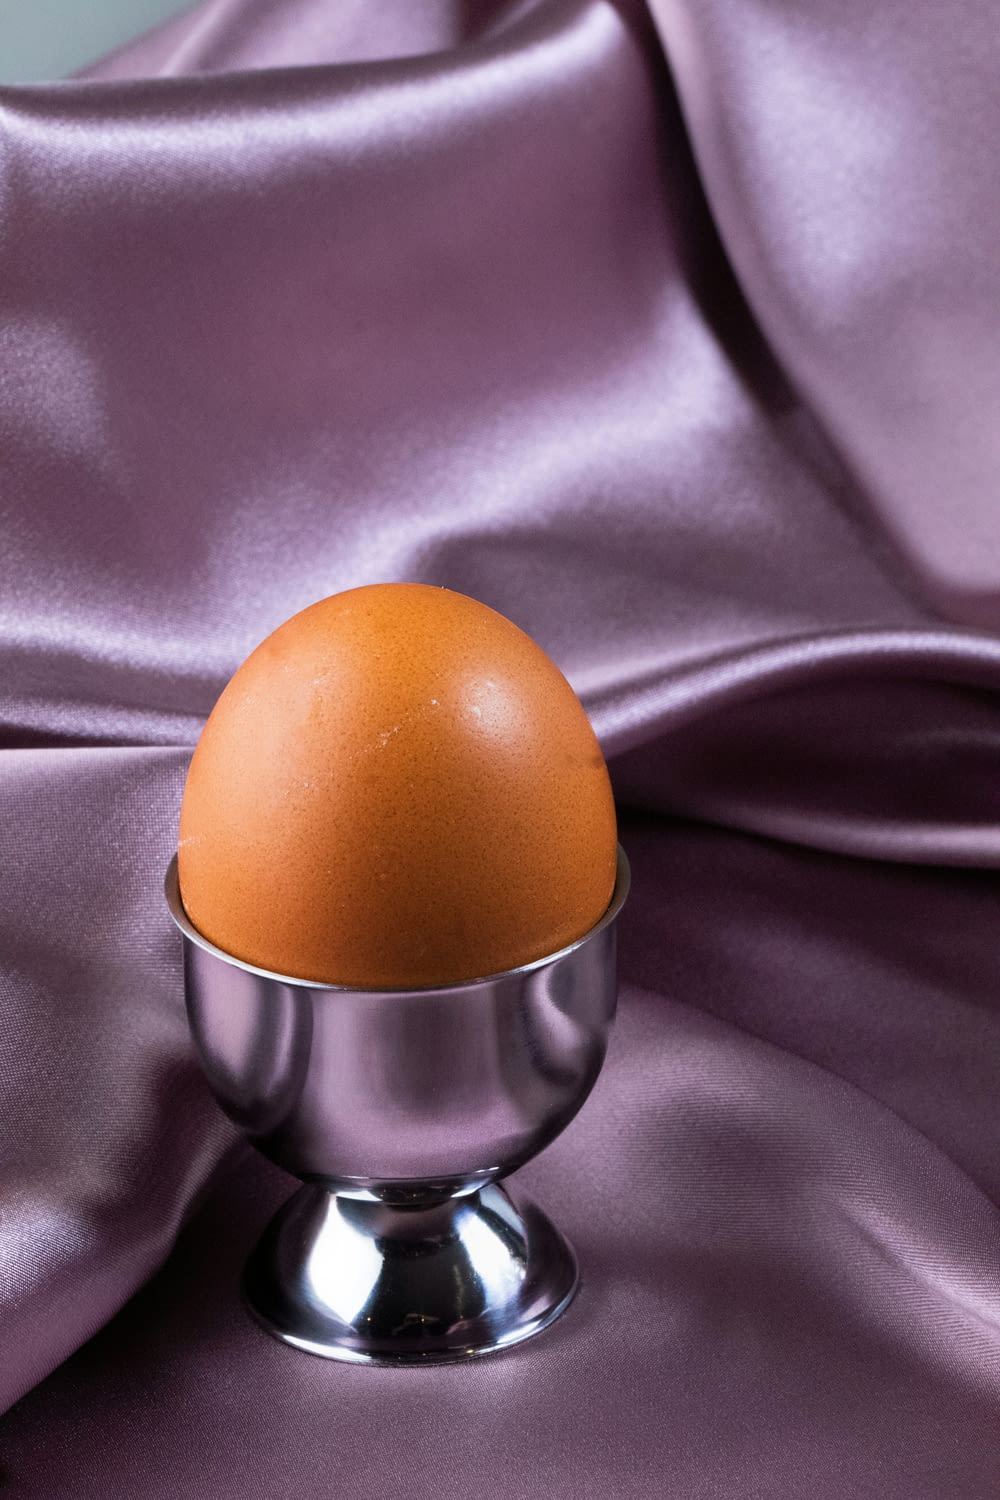 an egg in a silver bowl on a purple satin